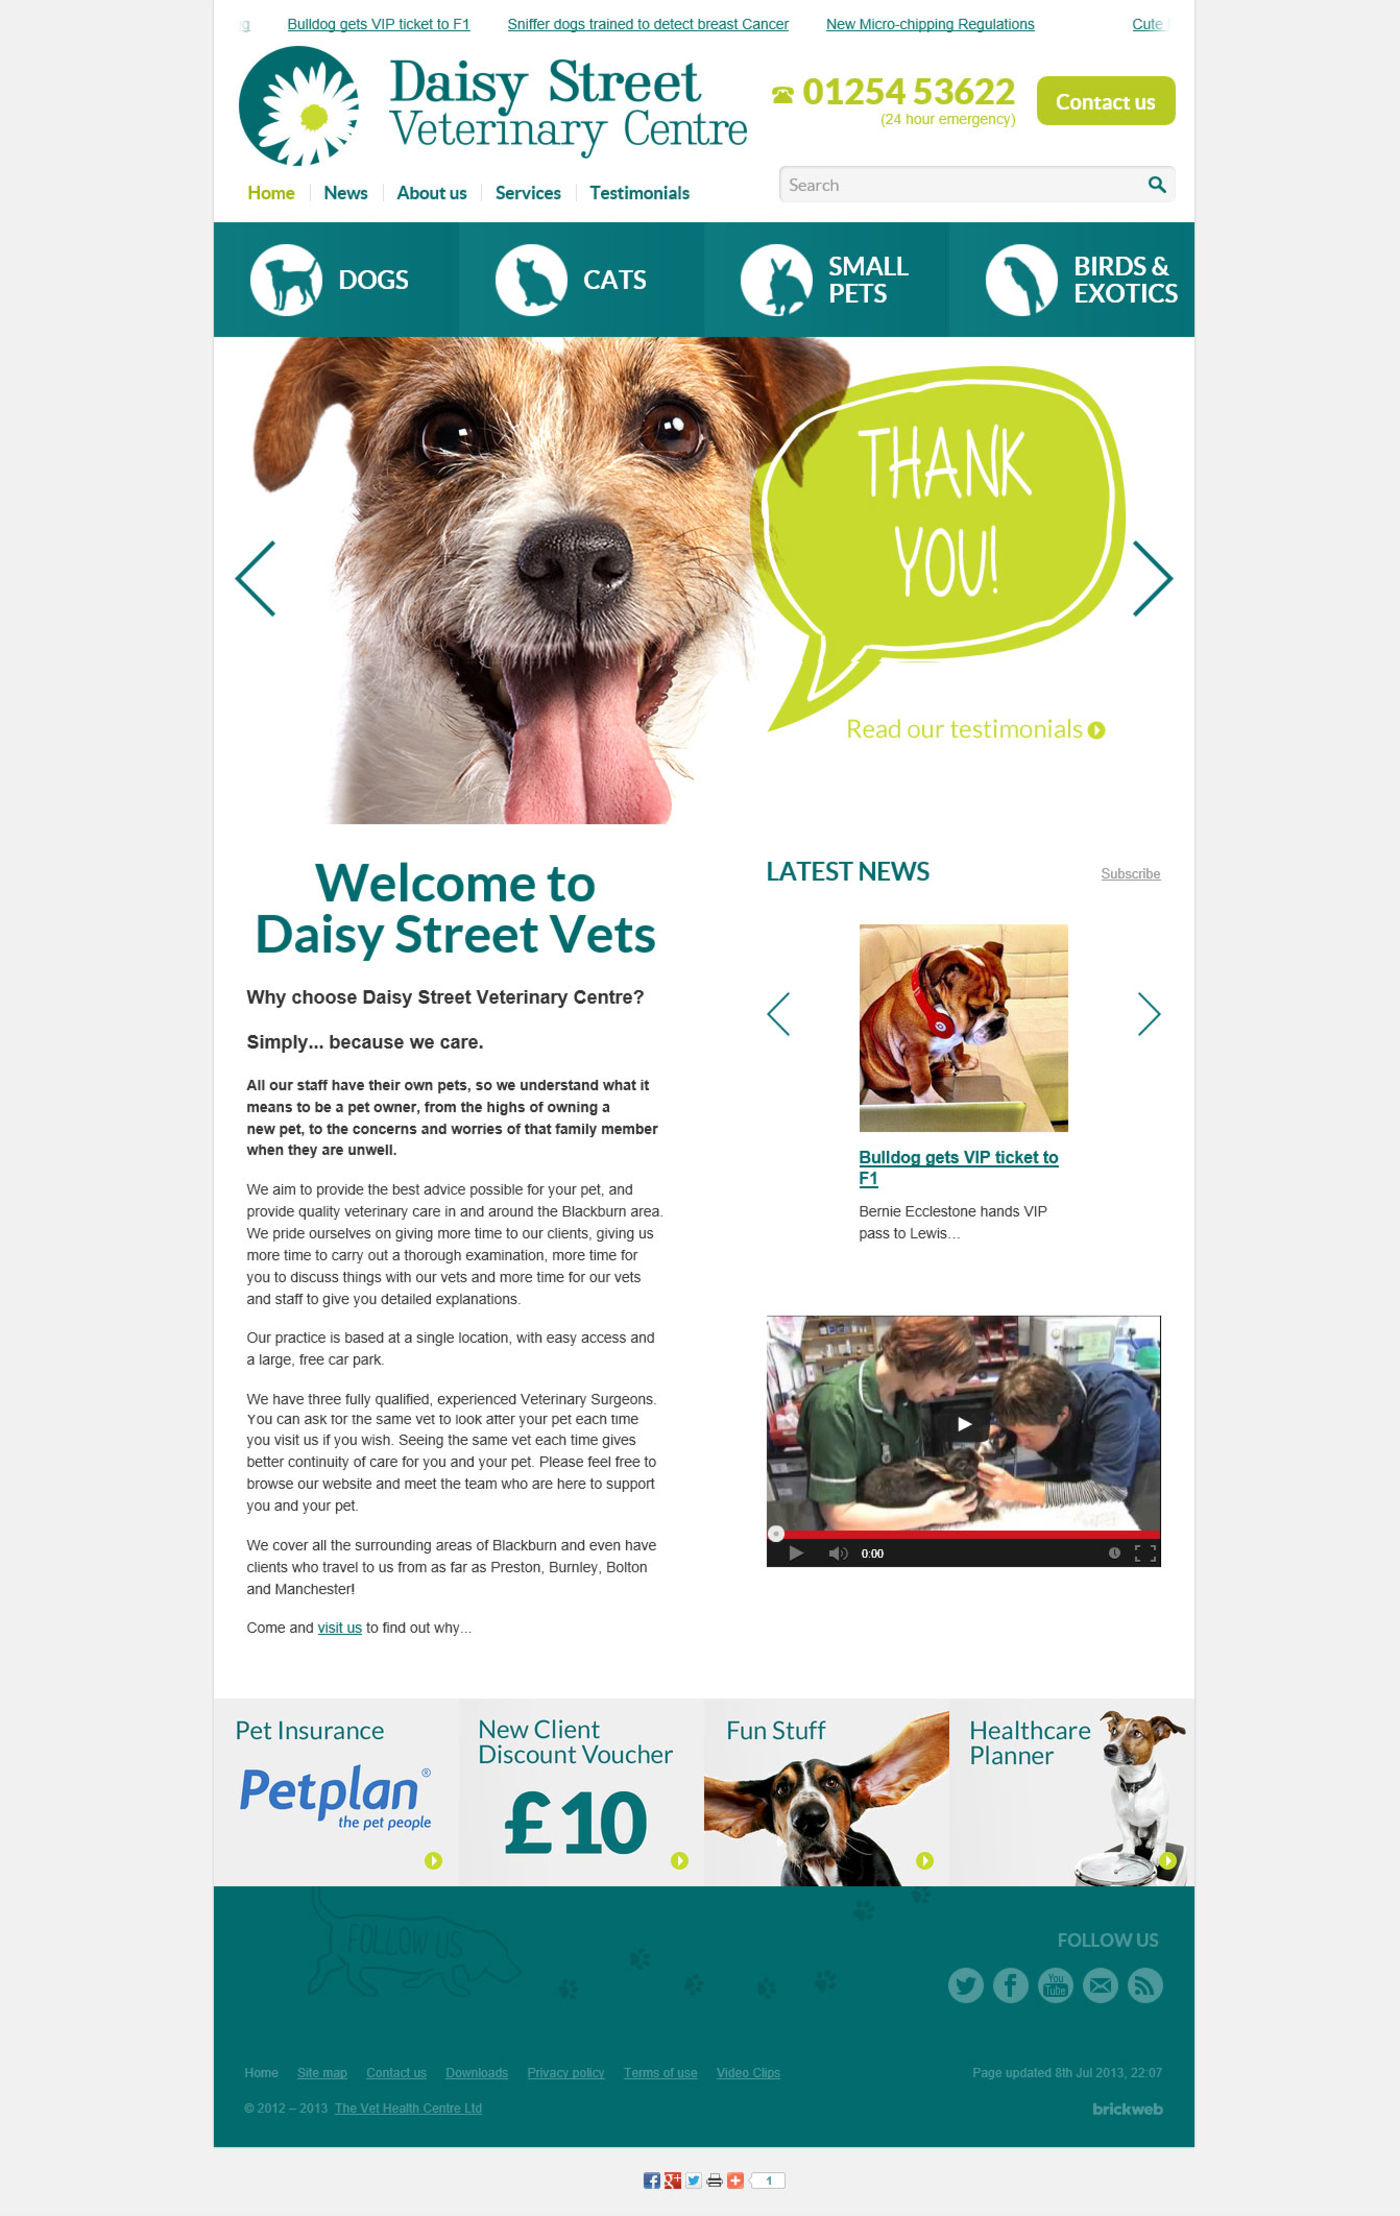 Daisy Street Vets Home page